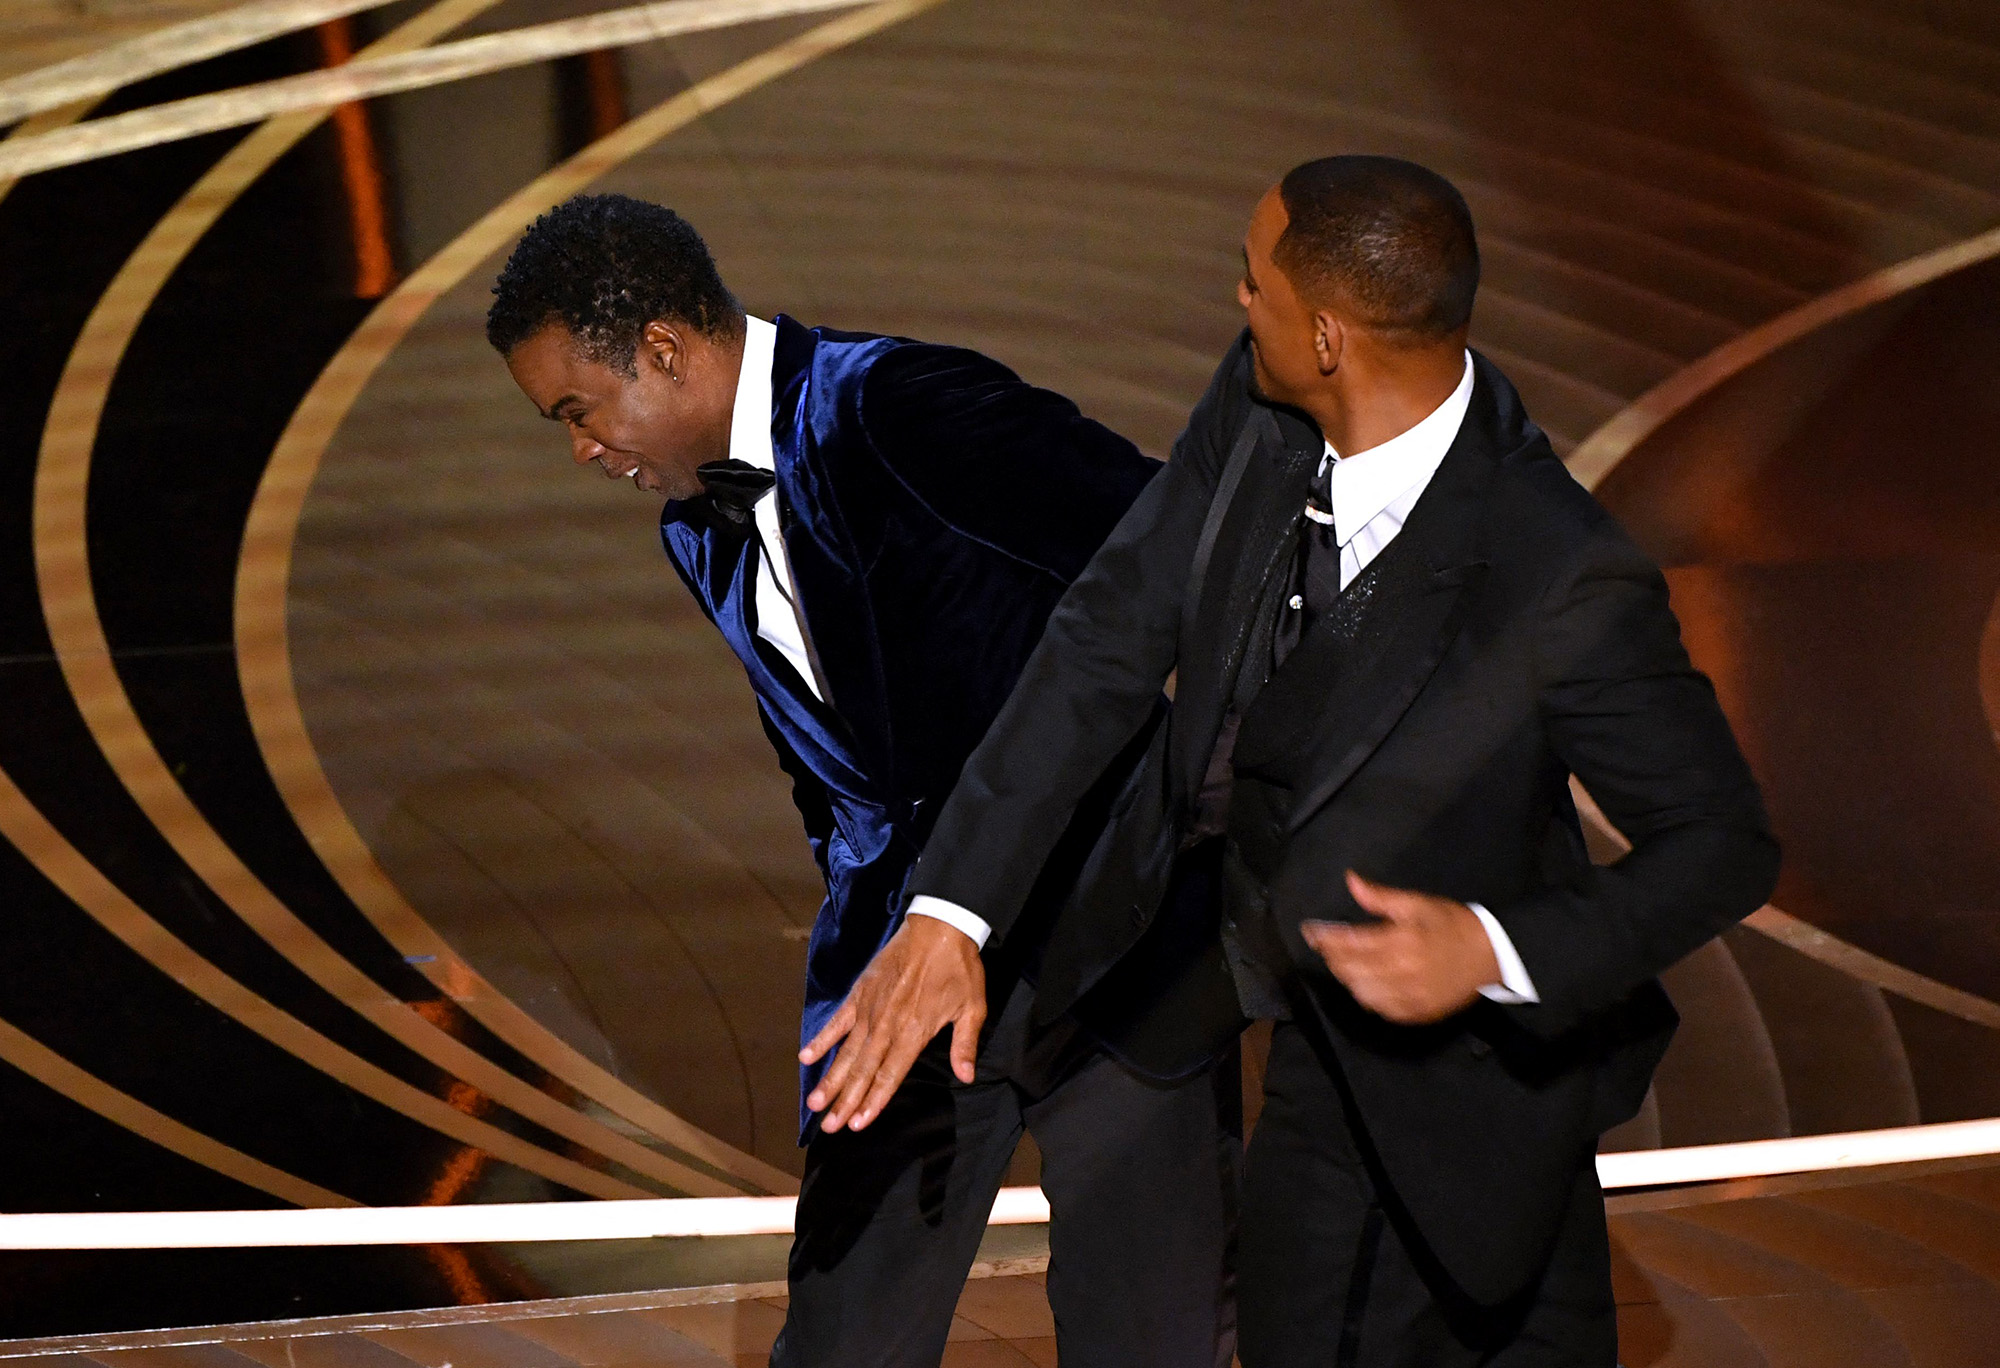 Chris Rock Addresses Will Smith Incident at Standup Show